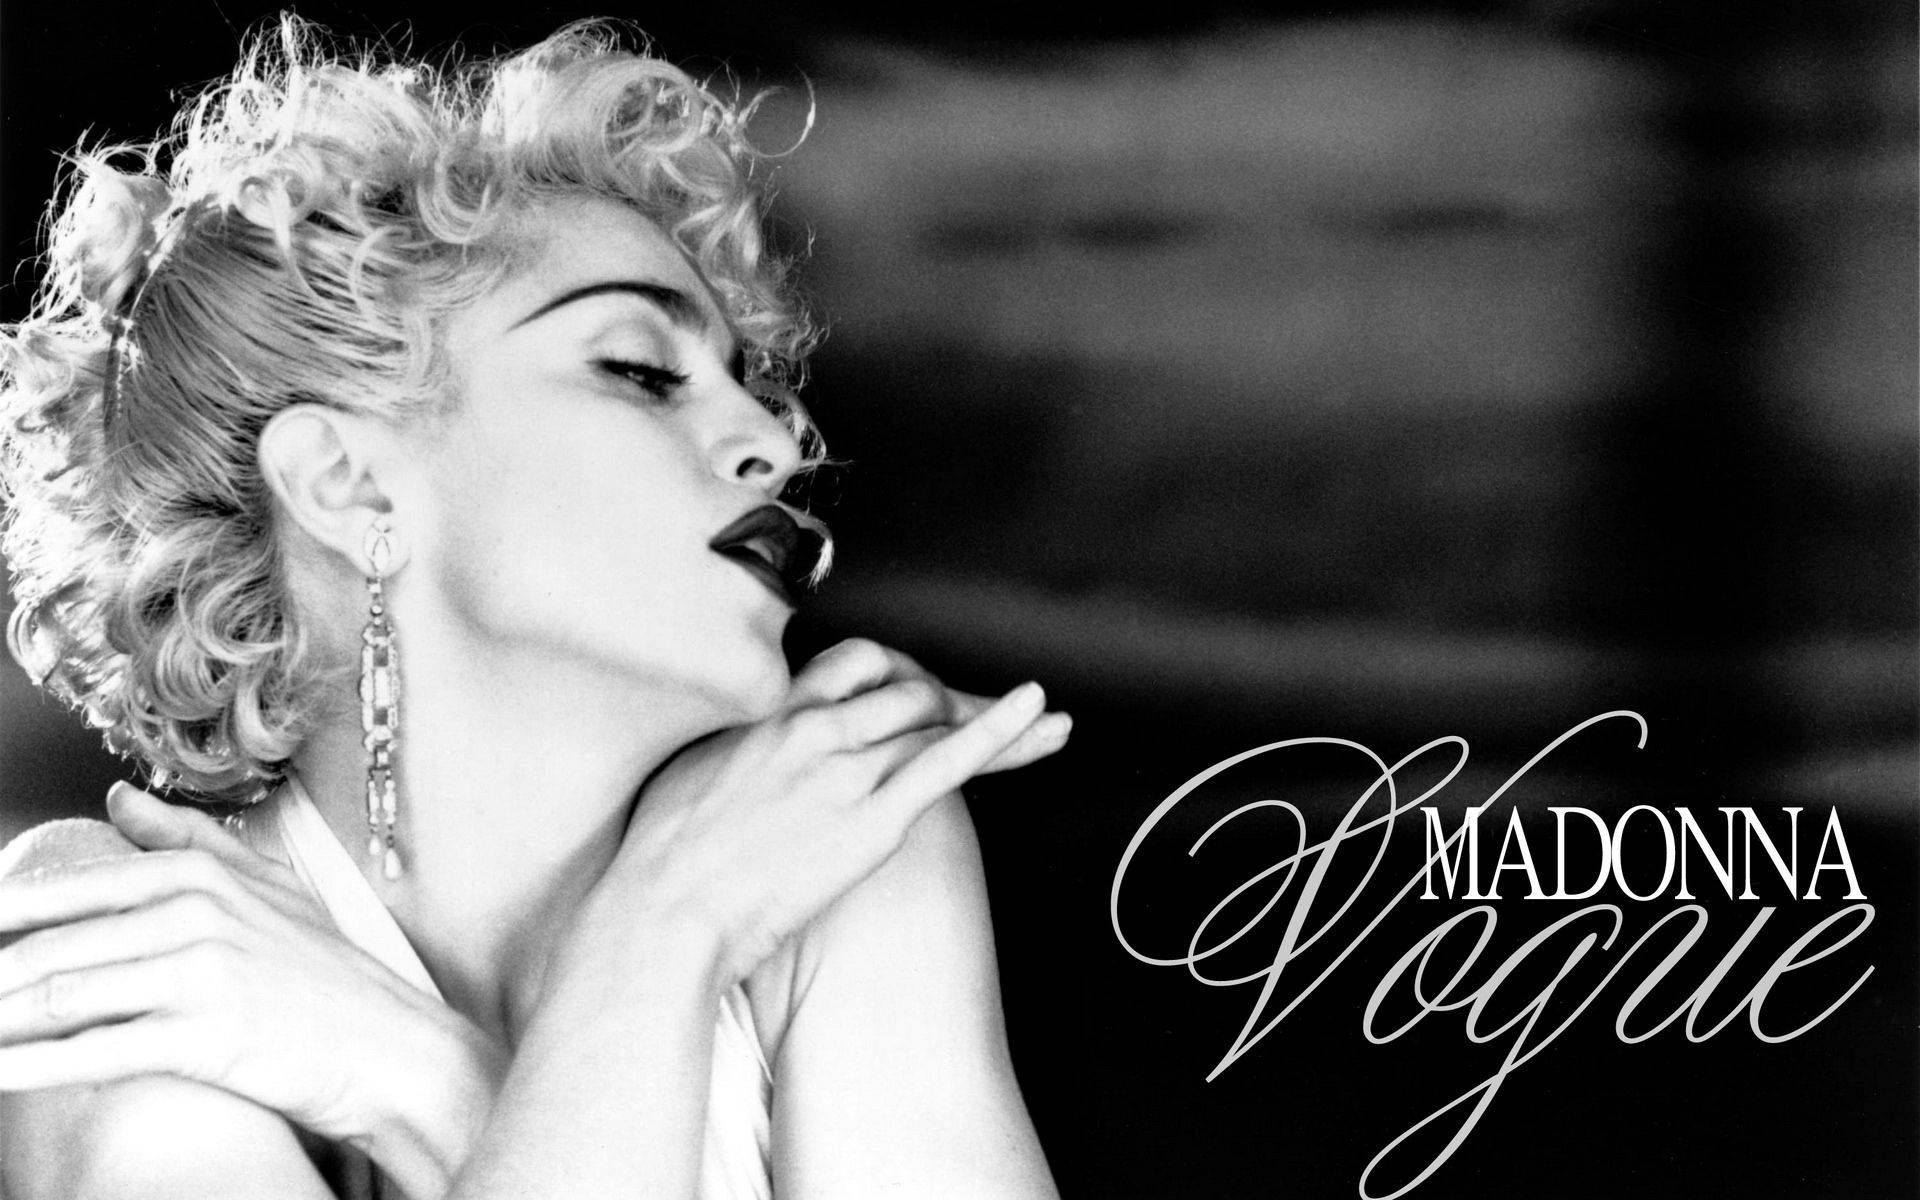 Madonna in Vogue - Iconic Wallpaper